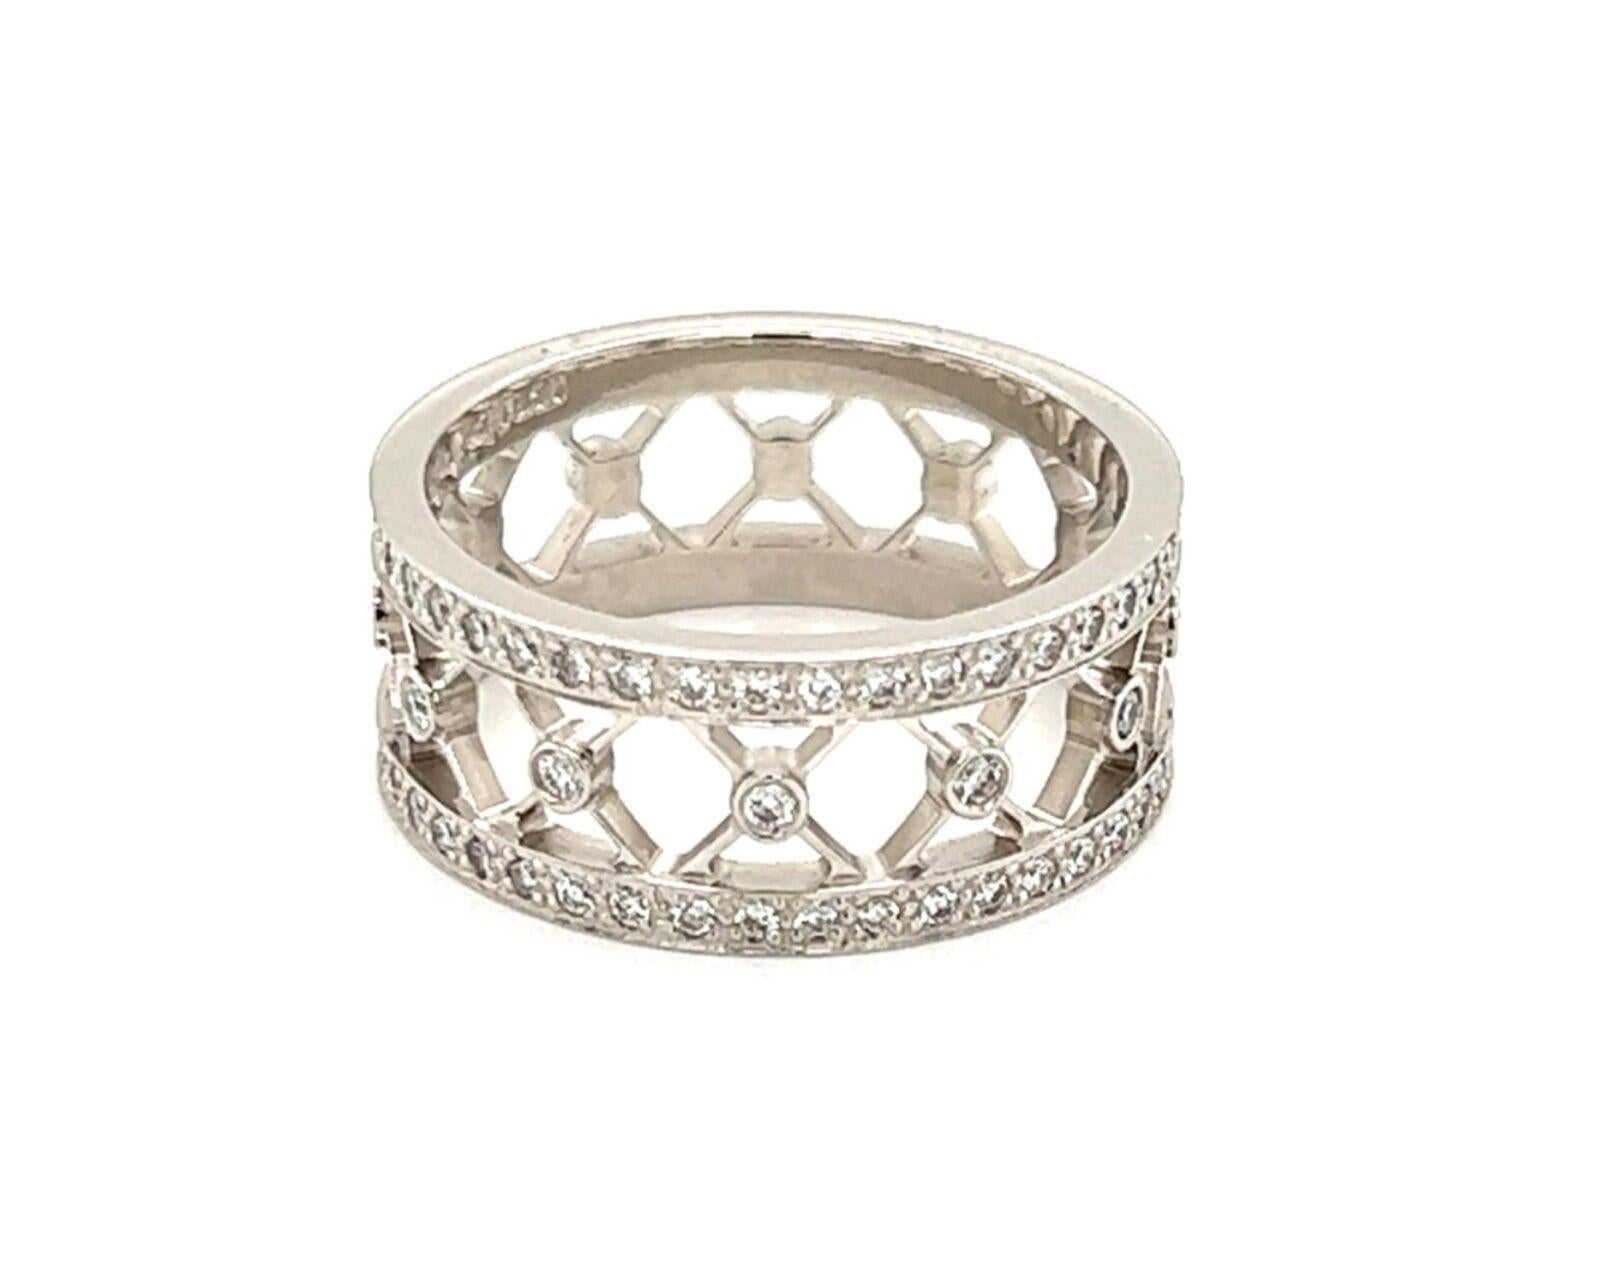 Tiffany & Co. Voile Diamond Platinum Open Band Ring In Excellent Condition For Sale In Boca Raton, FL